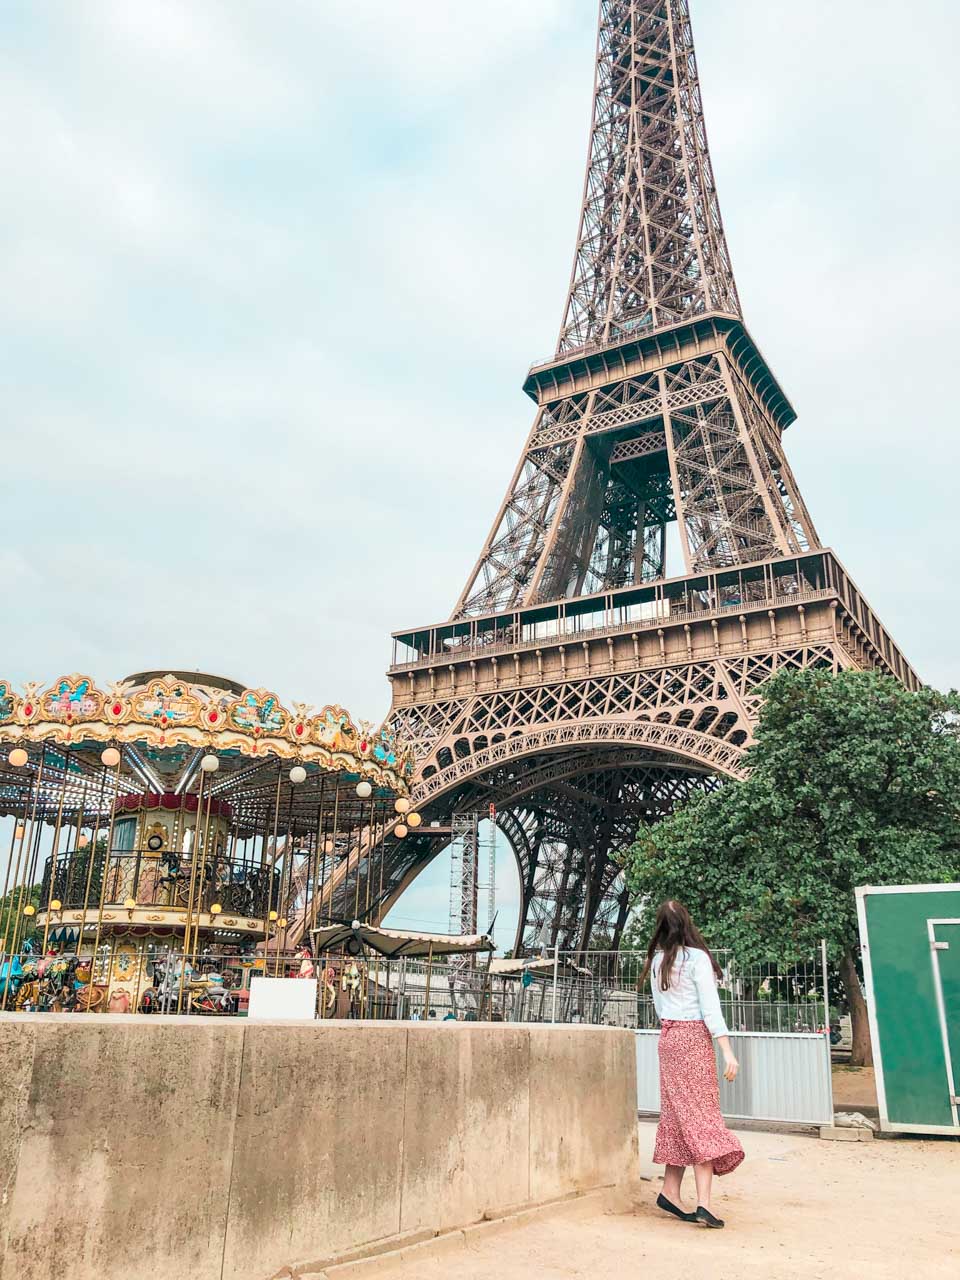 Woman in a white and red dress standing on tippy toes next to the Carousel of the Eiffel Tower